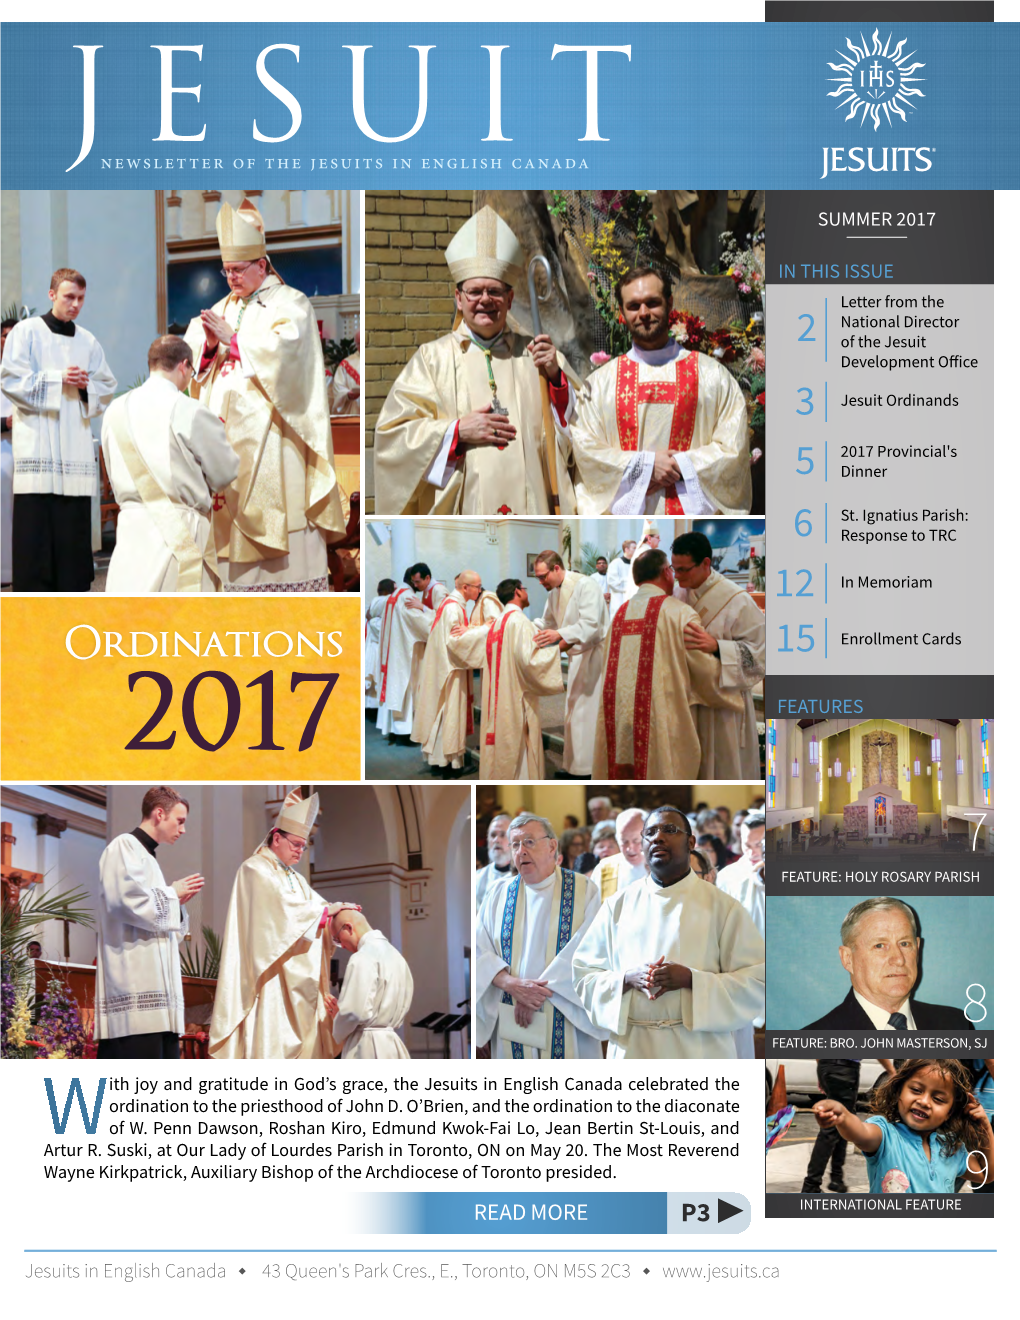 Ordinations 15 Enrollment Cards 2017 FEATURES 7 FEATURE: HOLY ROSARY PARISH